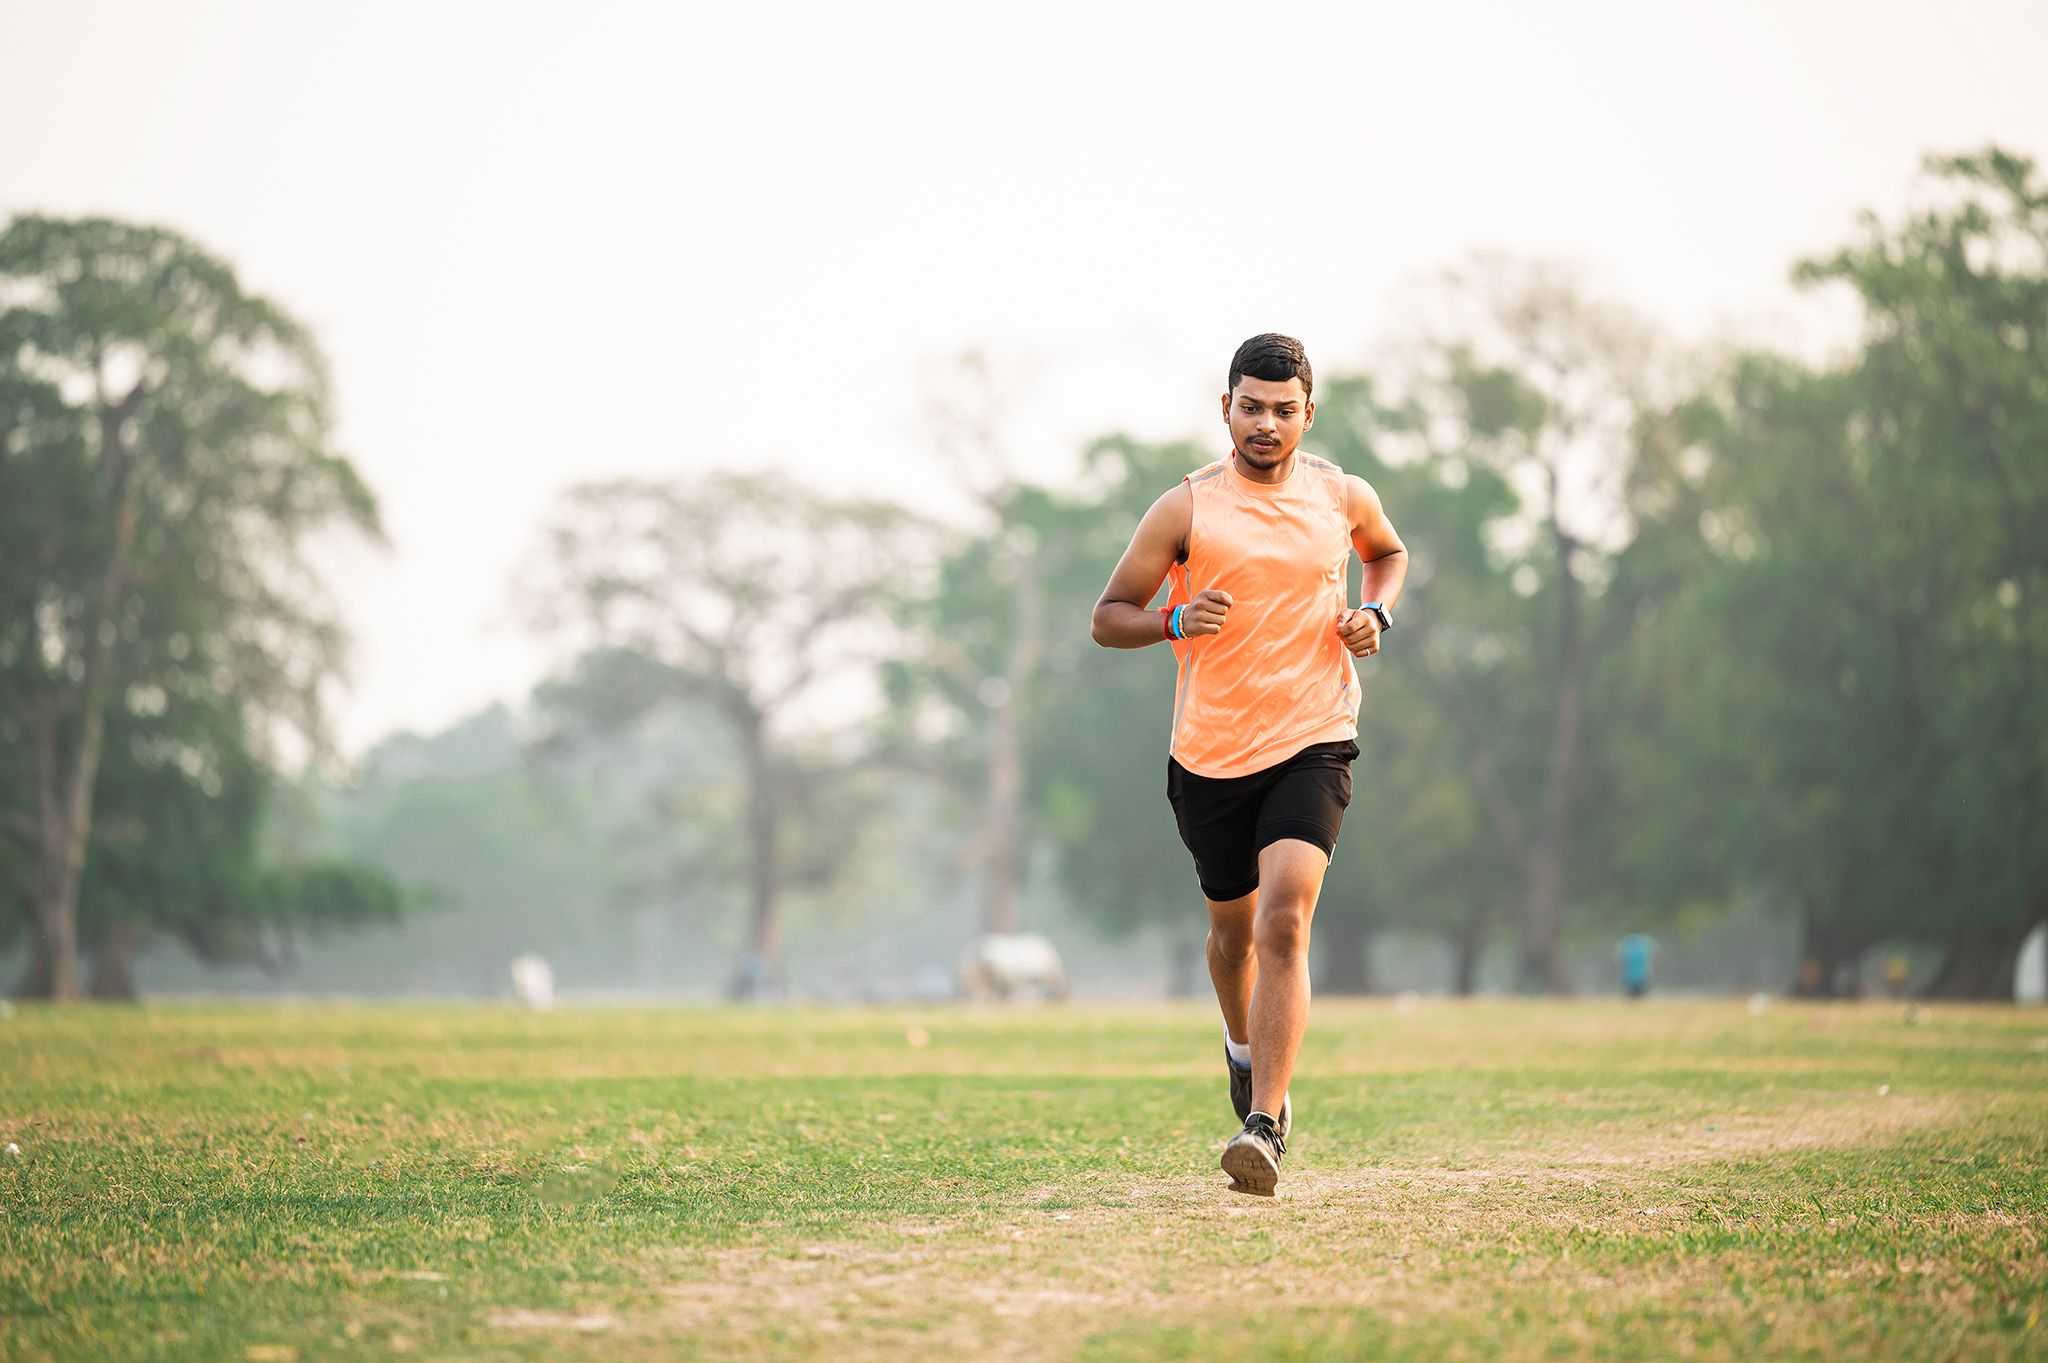 Runner's High: What it Is, Causes, and How to Get It